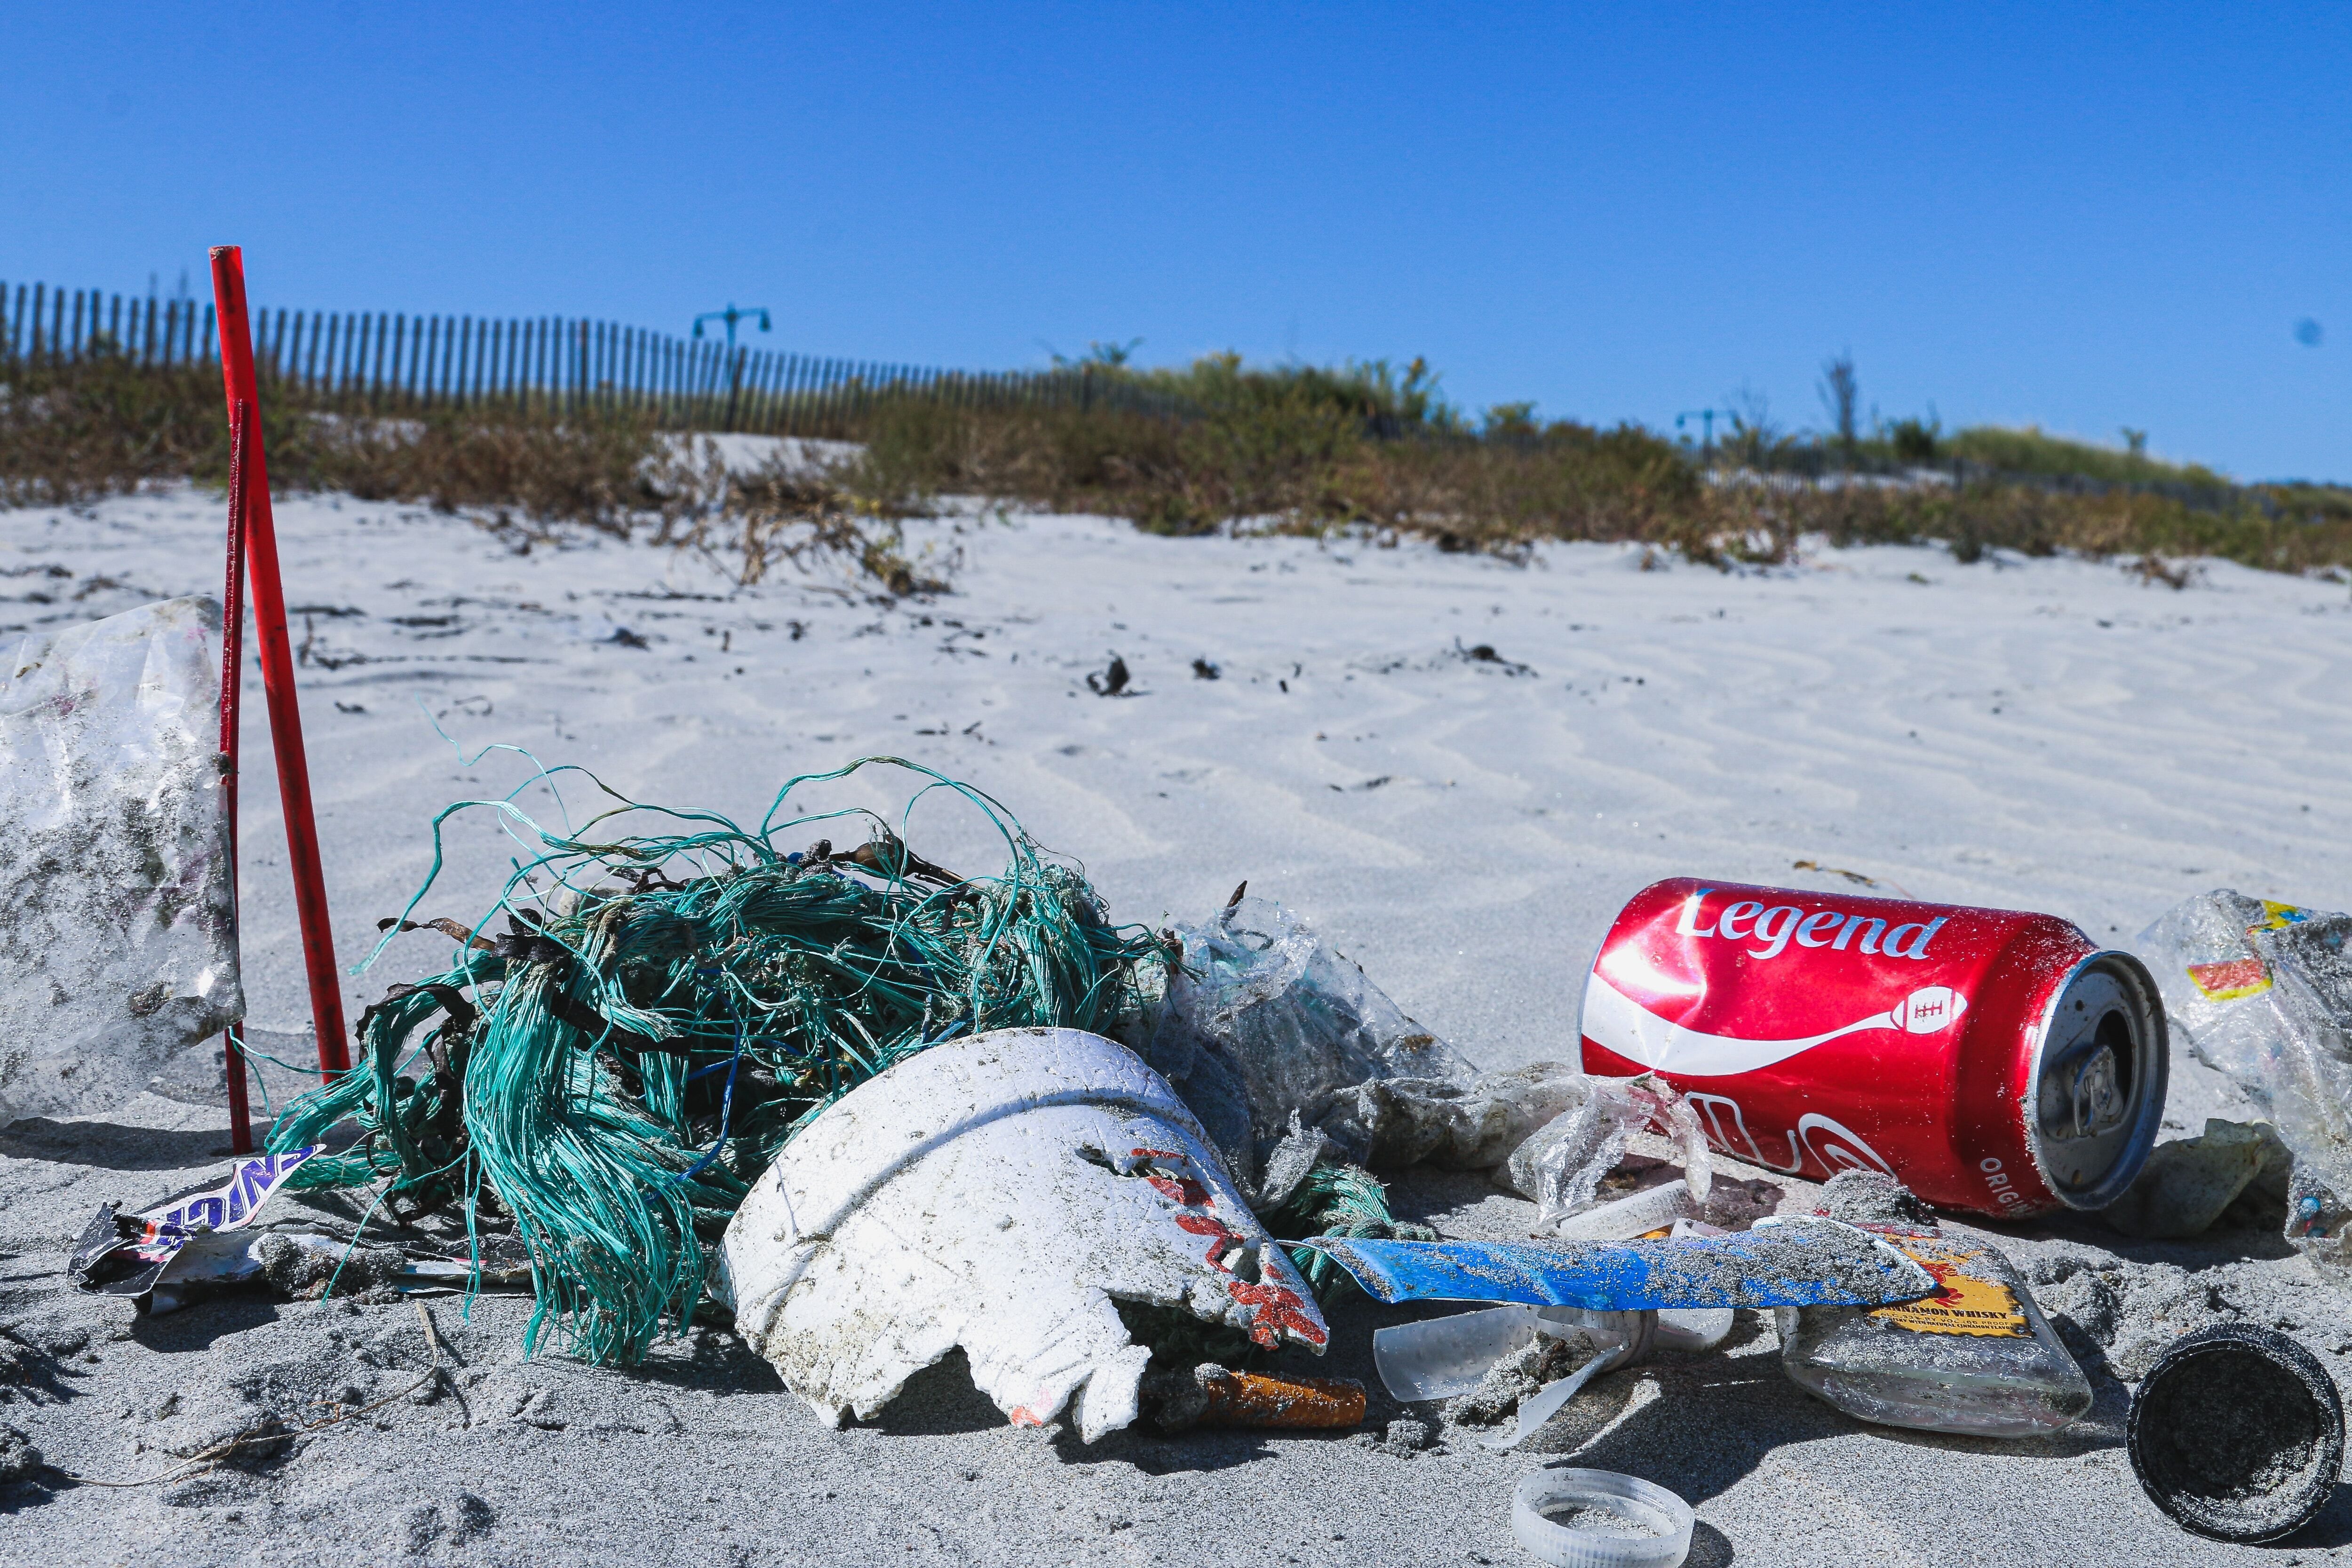 To ensure we can continue to enjoy our state’s beaches and shorelines for generations to come, we must be vigilant in decreasing and removing marine debris whenever possible. 